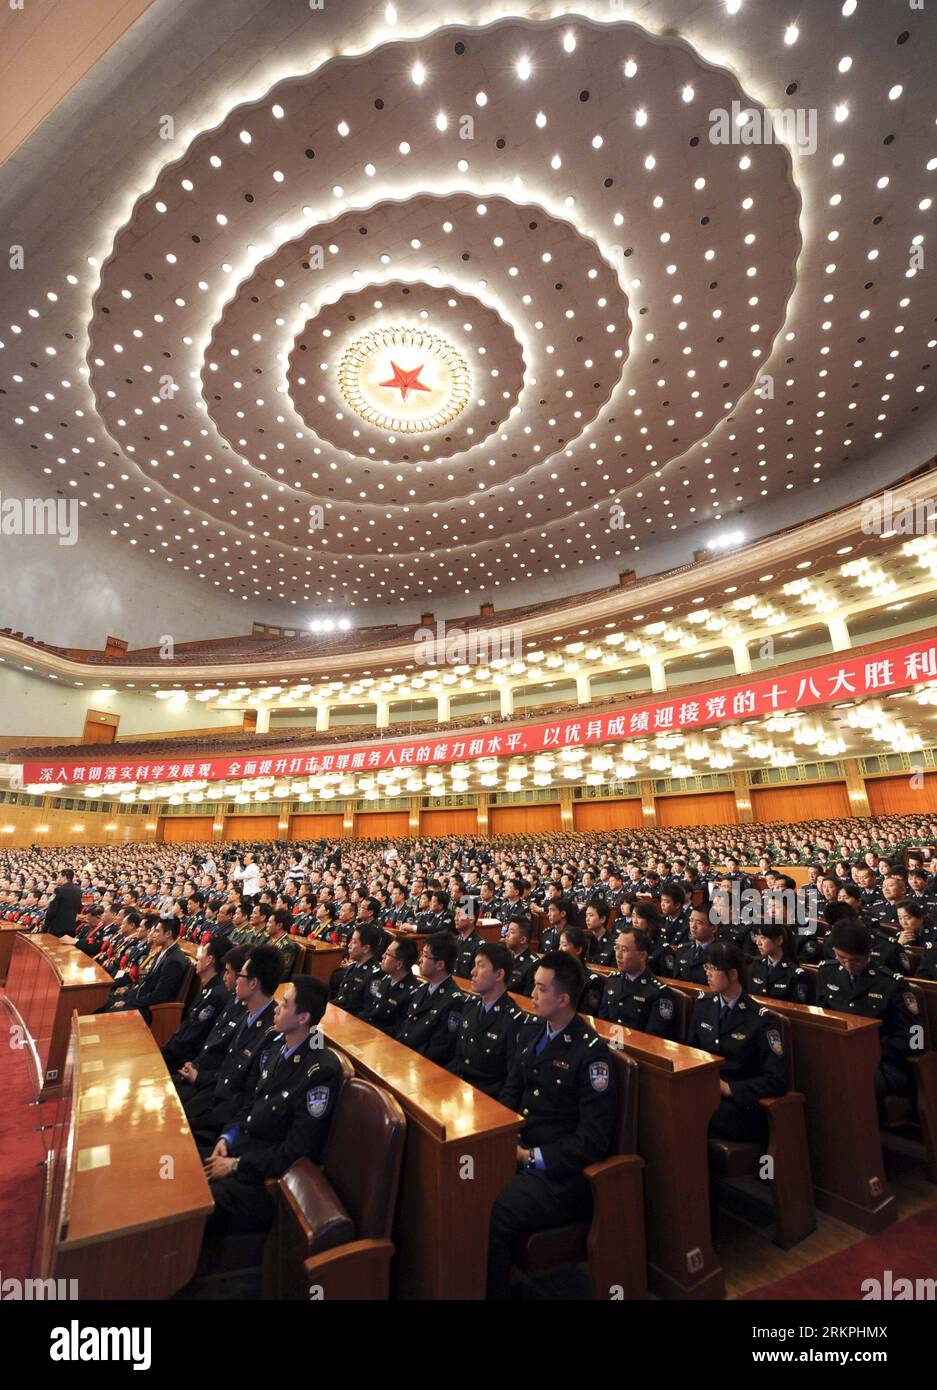 Bildnummer: 58002194  Datum: 18.05.2012  Copyright: imago/Xinhua (120518) -- BEIJING, May 18, 2012 (Xinhua) -- Delegates attend the awarding ceremony to honor the outstanding police officers at the Great Hall of the in Beijing, capital of China, May 18, 2012. (Xinhua/Zhang Duo) (ry) CHINA-BEIJING-POLICE OFFICERS-AWARDING CEREMONY (CN) PUBLICATIONxNOTxINxCHN Politik Polizei Polizist Auszeichnung Ehrung xjh x0x premiumd 2012 hoch      58002194 Date 18 05 2012 Copyright Imago XINHUA  Beijing May 18 2012 XINHUA Delegates attend The awarding Ceremony to HONOR The Outstanding Police Officers AT The Stock Photo